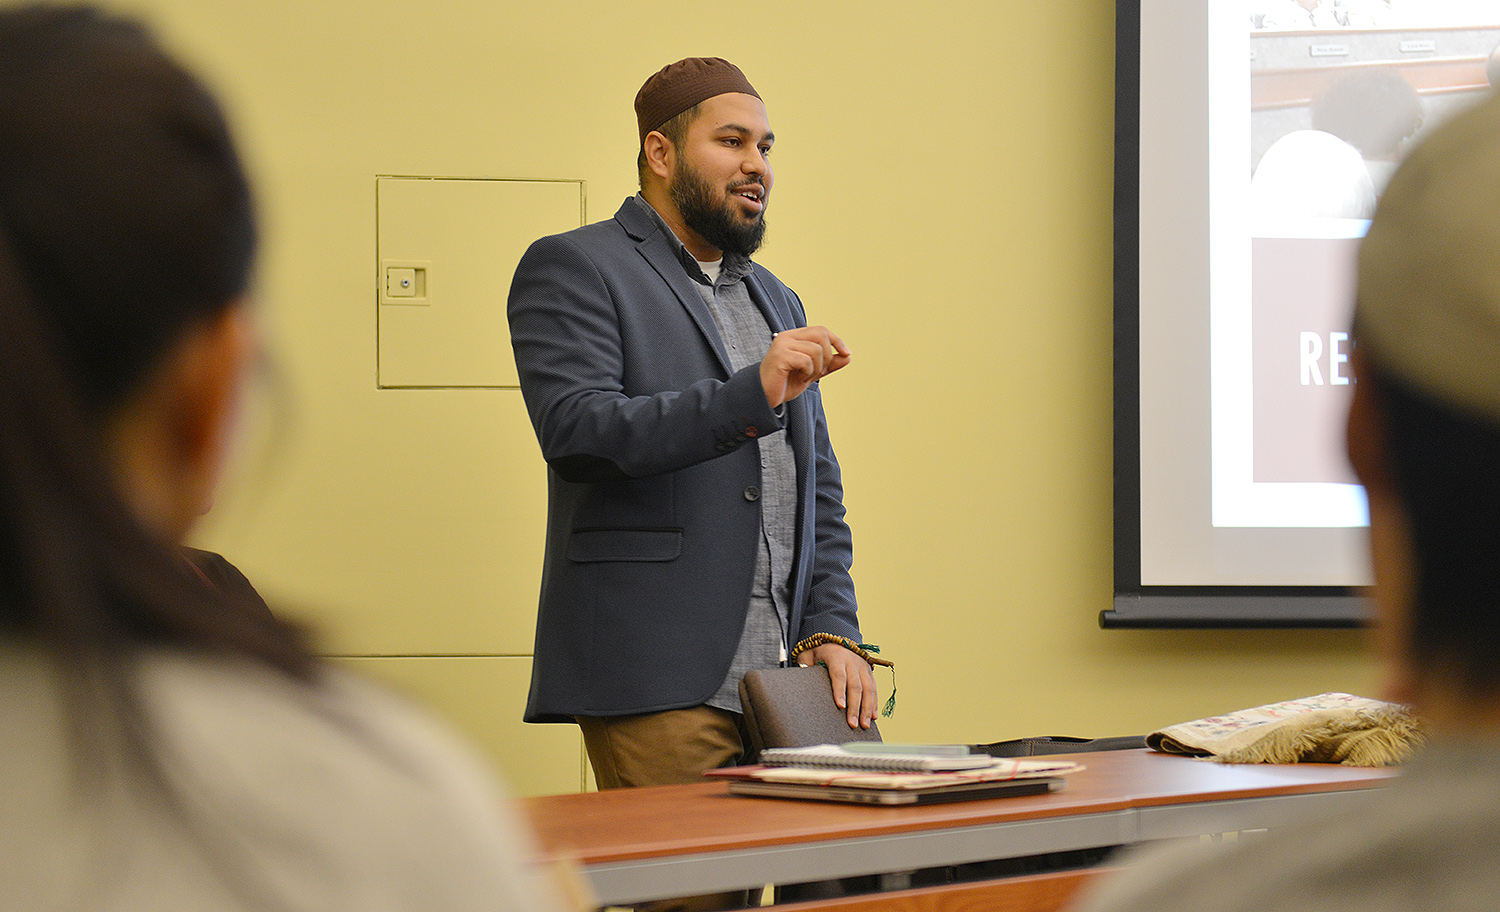 Chaplain Sami Aziz spoke on "Islamophobia and Our Denial of It." He discussed the Anti-Sharia Bill, refugees, and the potential for genocide. Chaplain Aziz has studied various classical Islamic sciences in his studies within the United States and abroad.